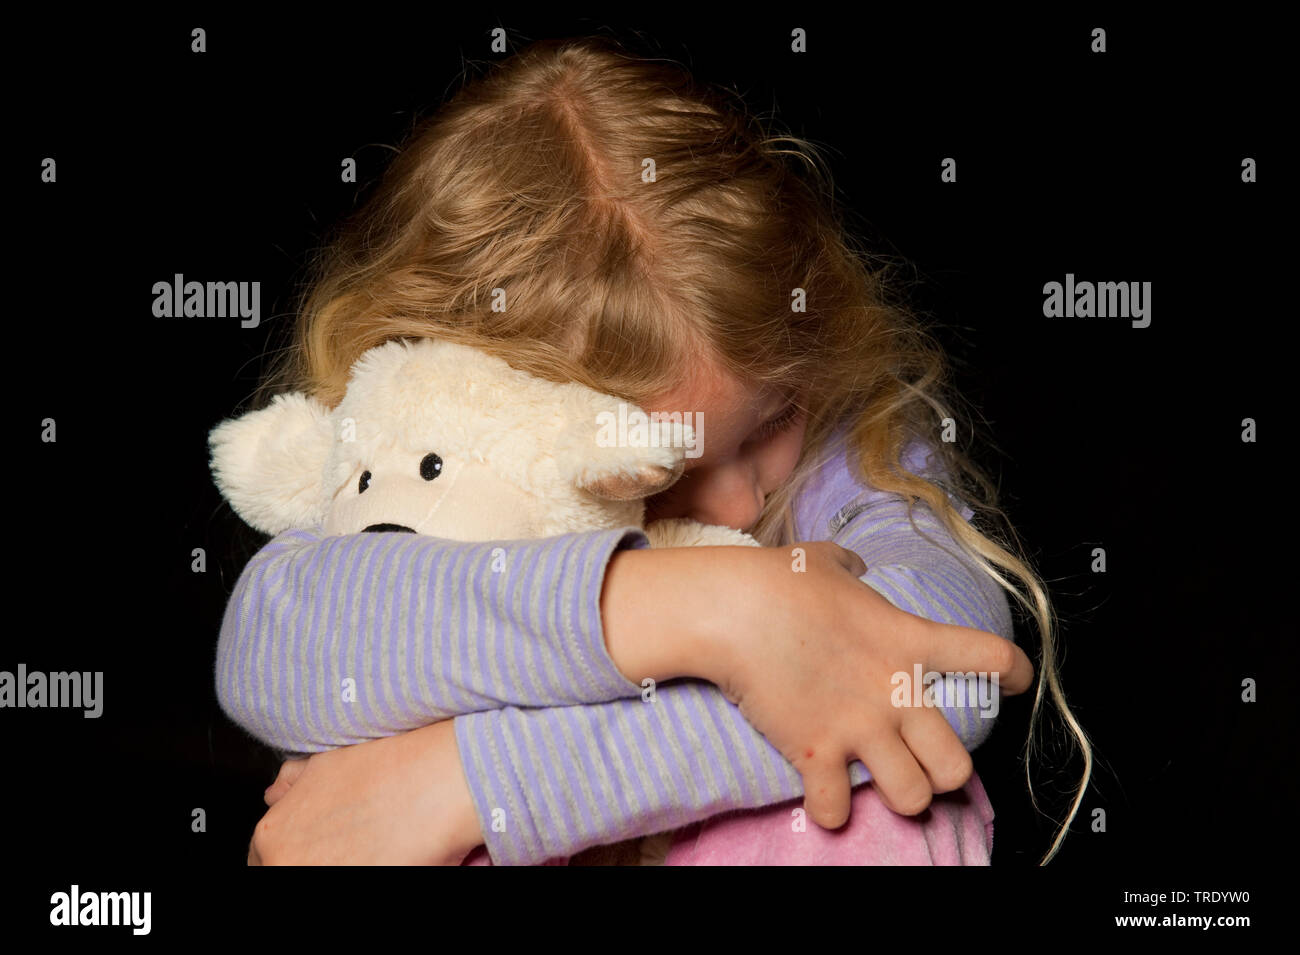 Portait of a young girl, hidding her head behind a stuffed animal - child abuse Stock Photo